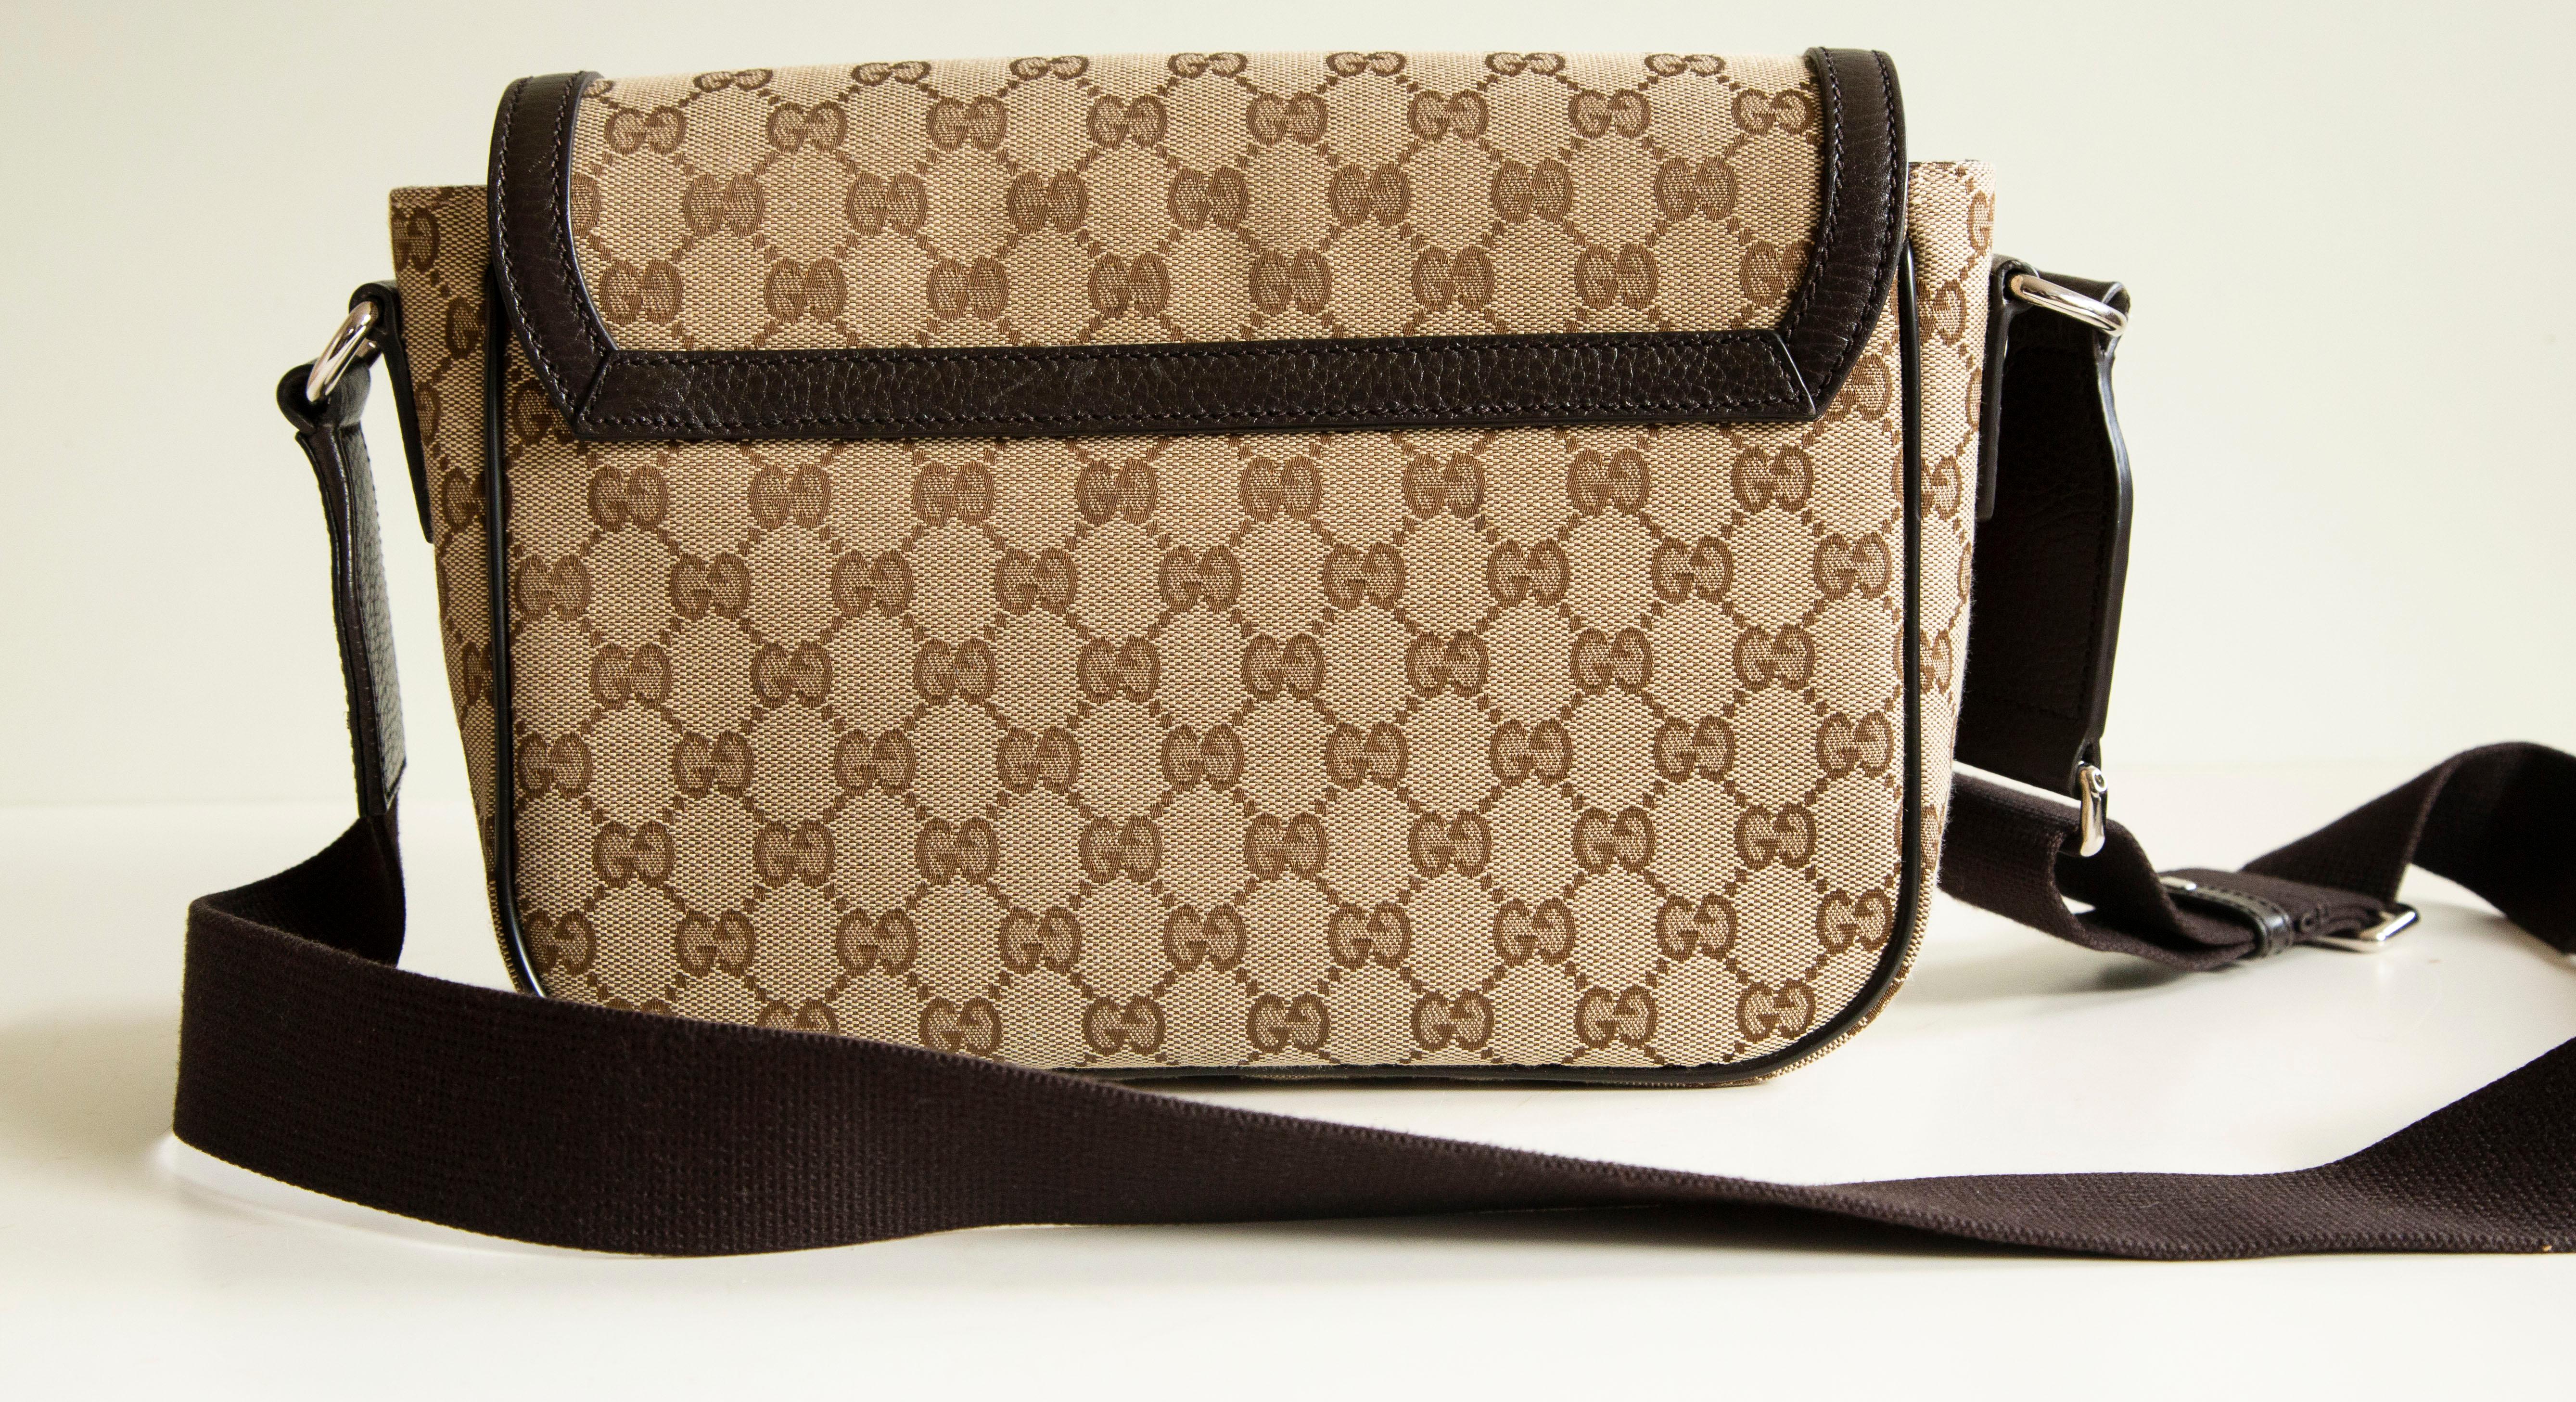 An unisex Gucci messenger bag in brown and beige canvas with brown leather trim. The bag features a GG web exterior, brown leather trim, and silver-tone hardware. The interior is lined with brown fabric and there are three side pockets of which one